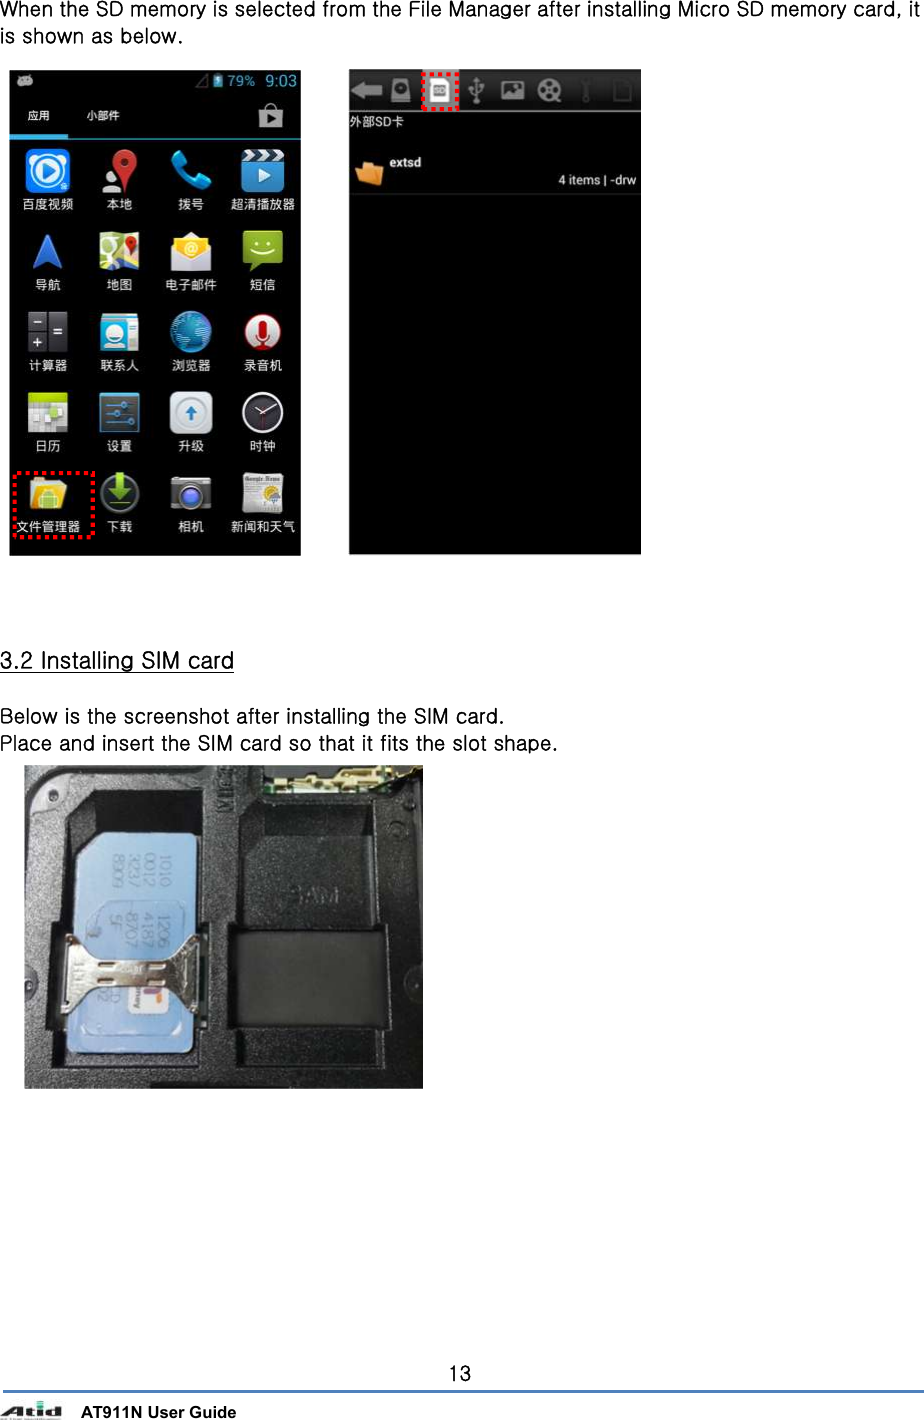       AT911N User Guide 13 When the SD memory is selected from the File Manager after installing Micro SD memory card, it is shown as below.                         3.2 Installing SIM card  Below is the screenshot after installing the SIM card. Place and insert the SIM card so that it fits the slot shape.                   